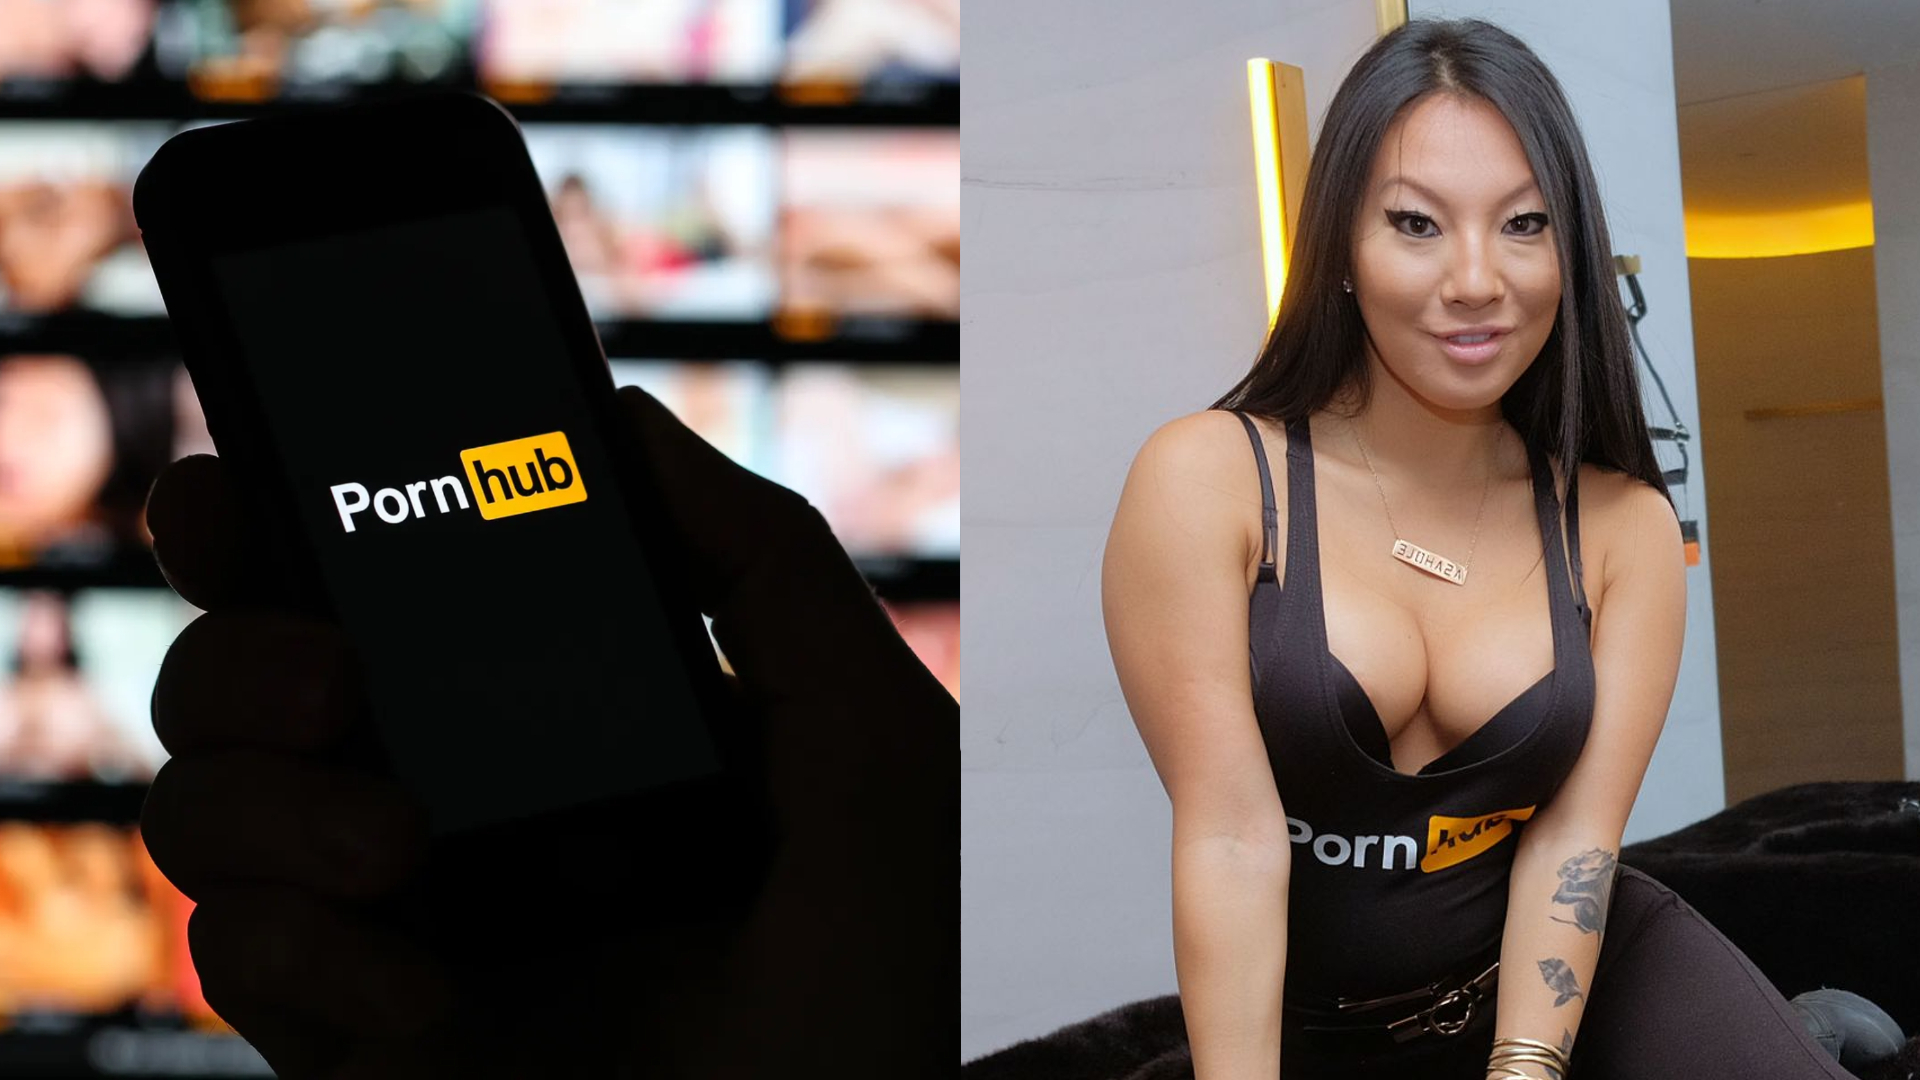 Pnrnhub - Pornhub Sold To Private Equity Firm For Undisclosed Amount